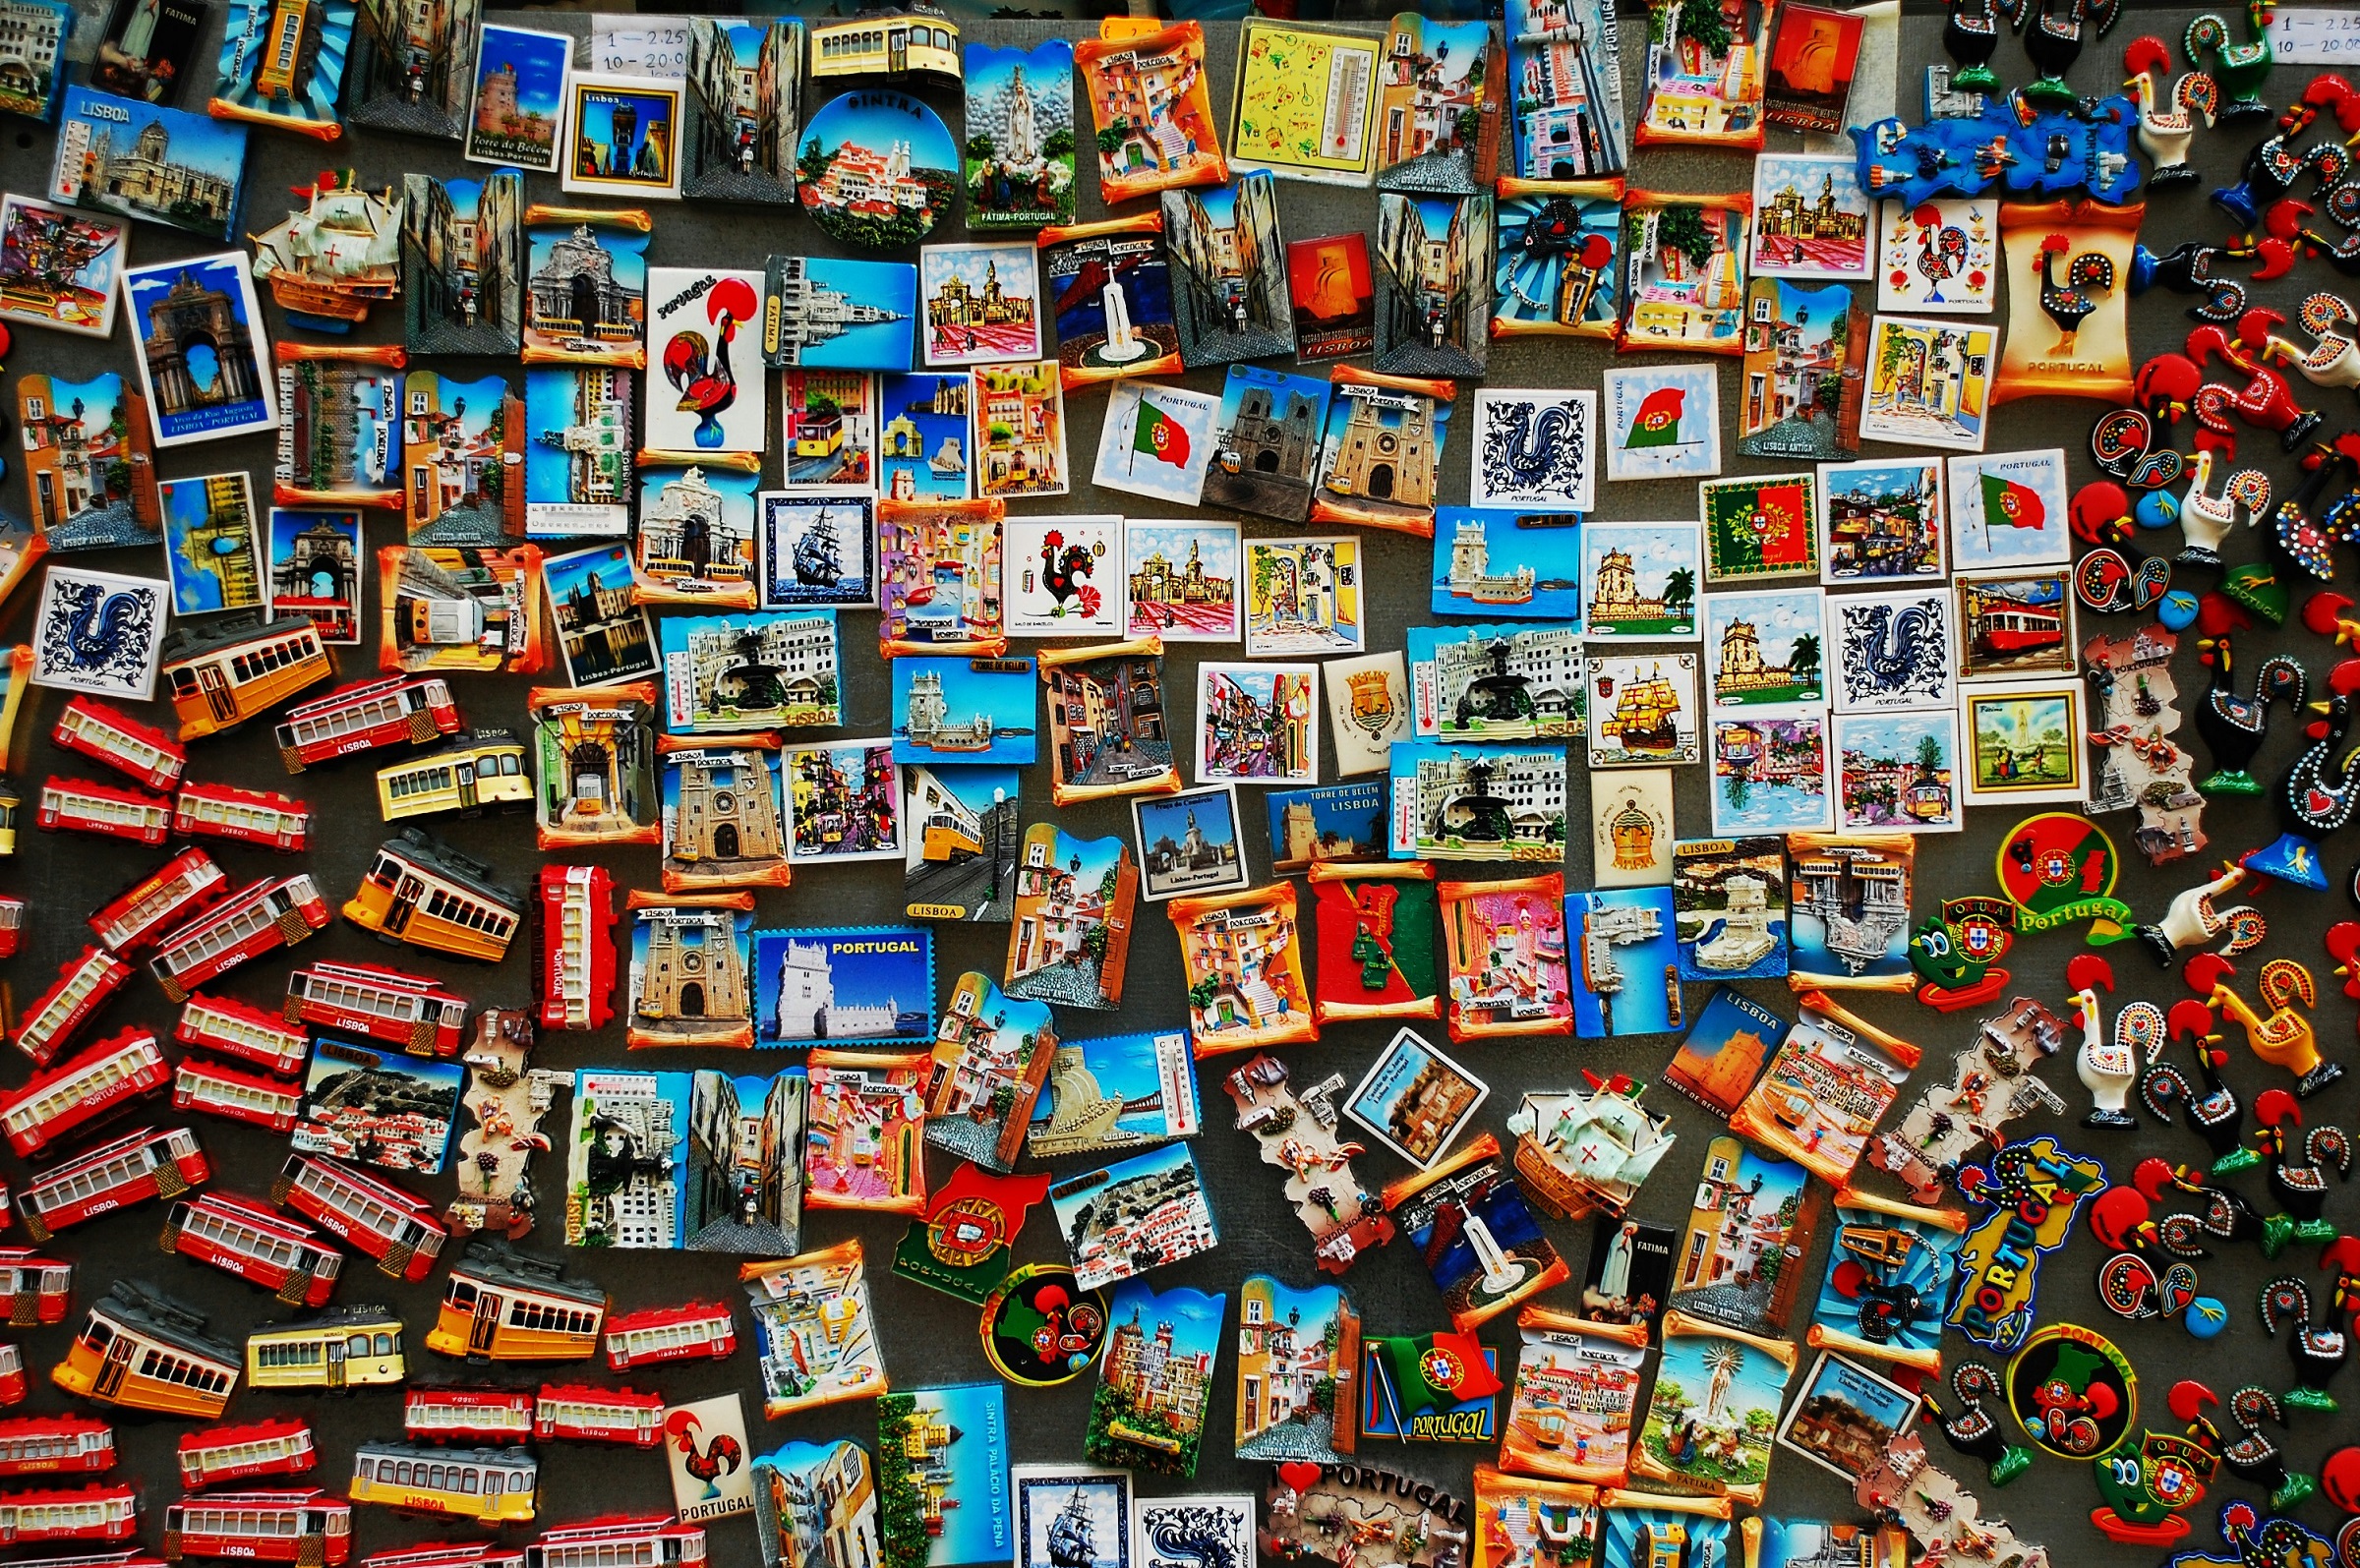 A wall of magnets depicting various locations and tourist destinations.